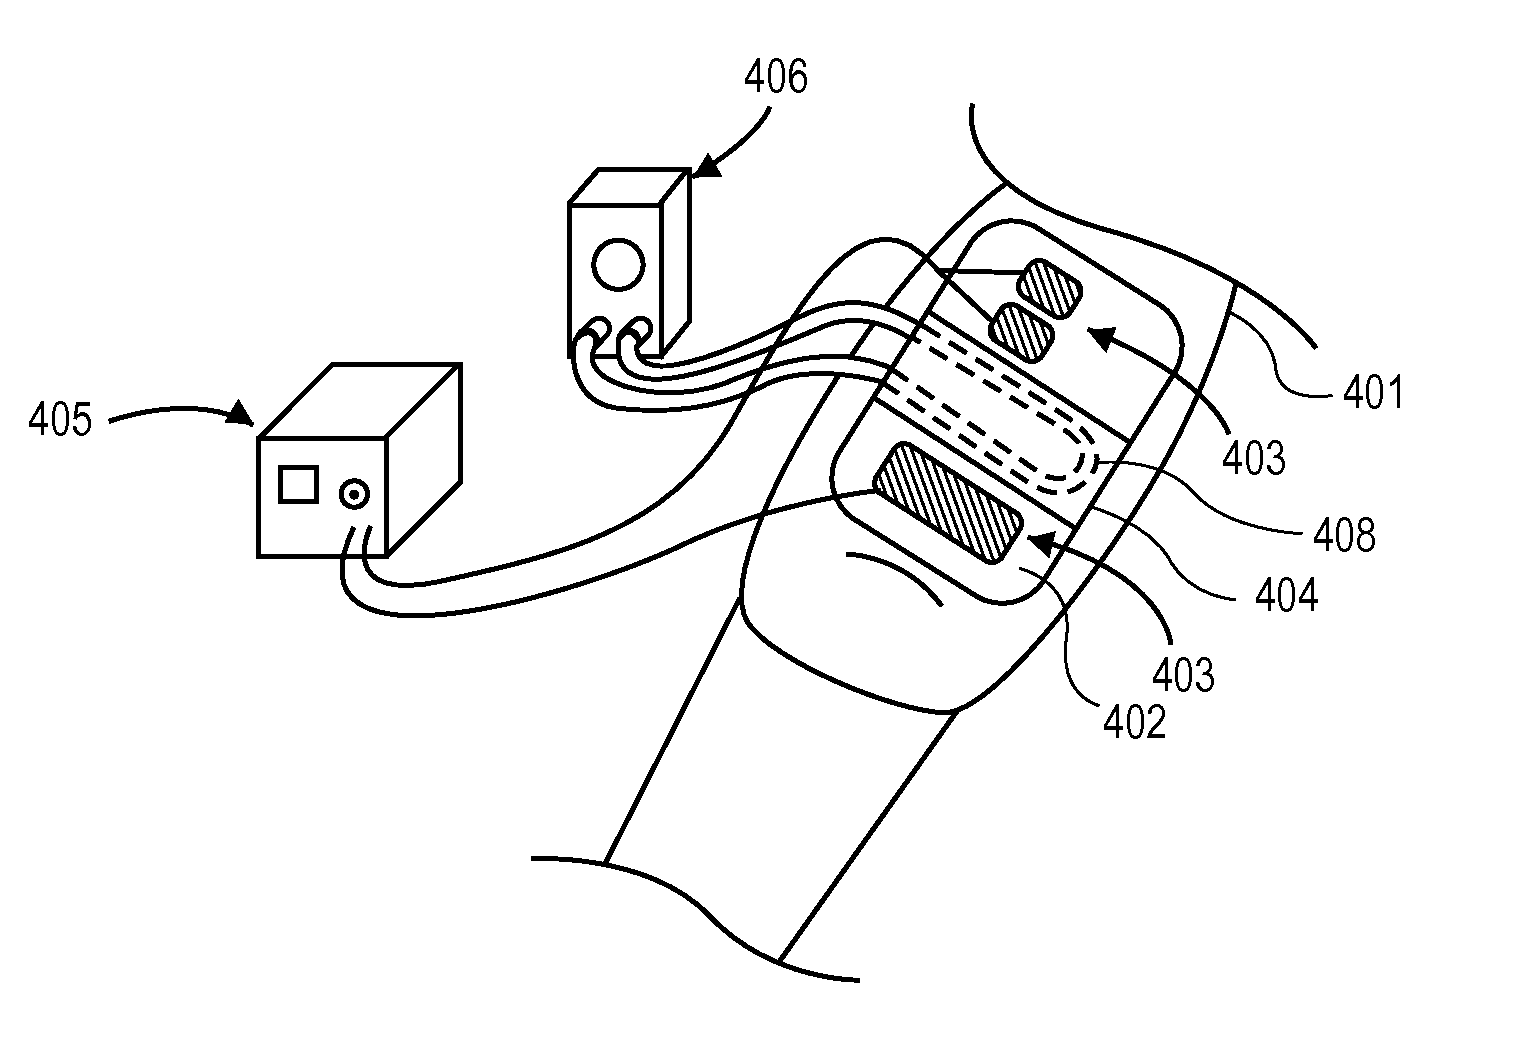 Devices and Systems for Stimulation of Tissues